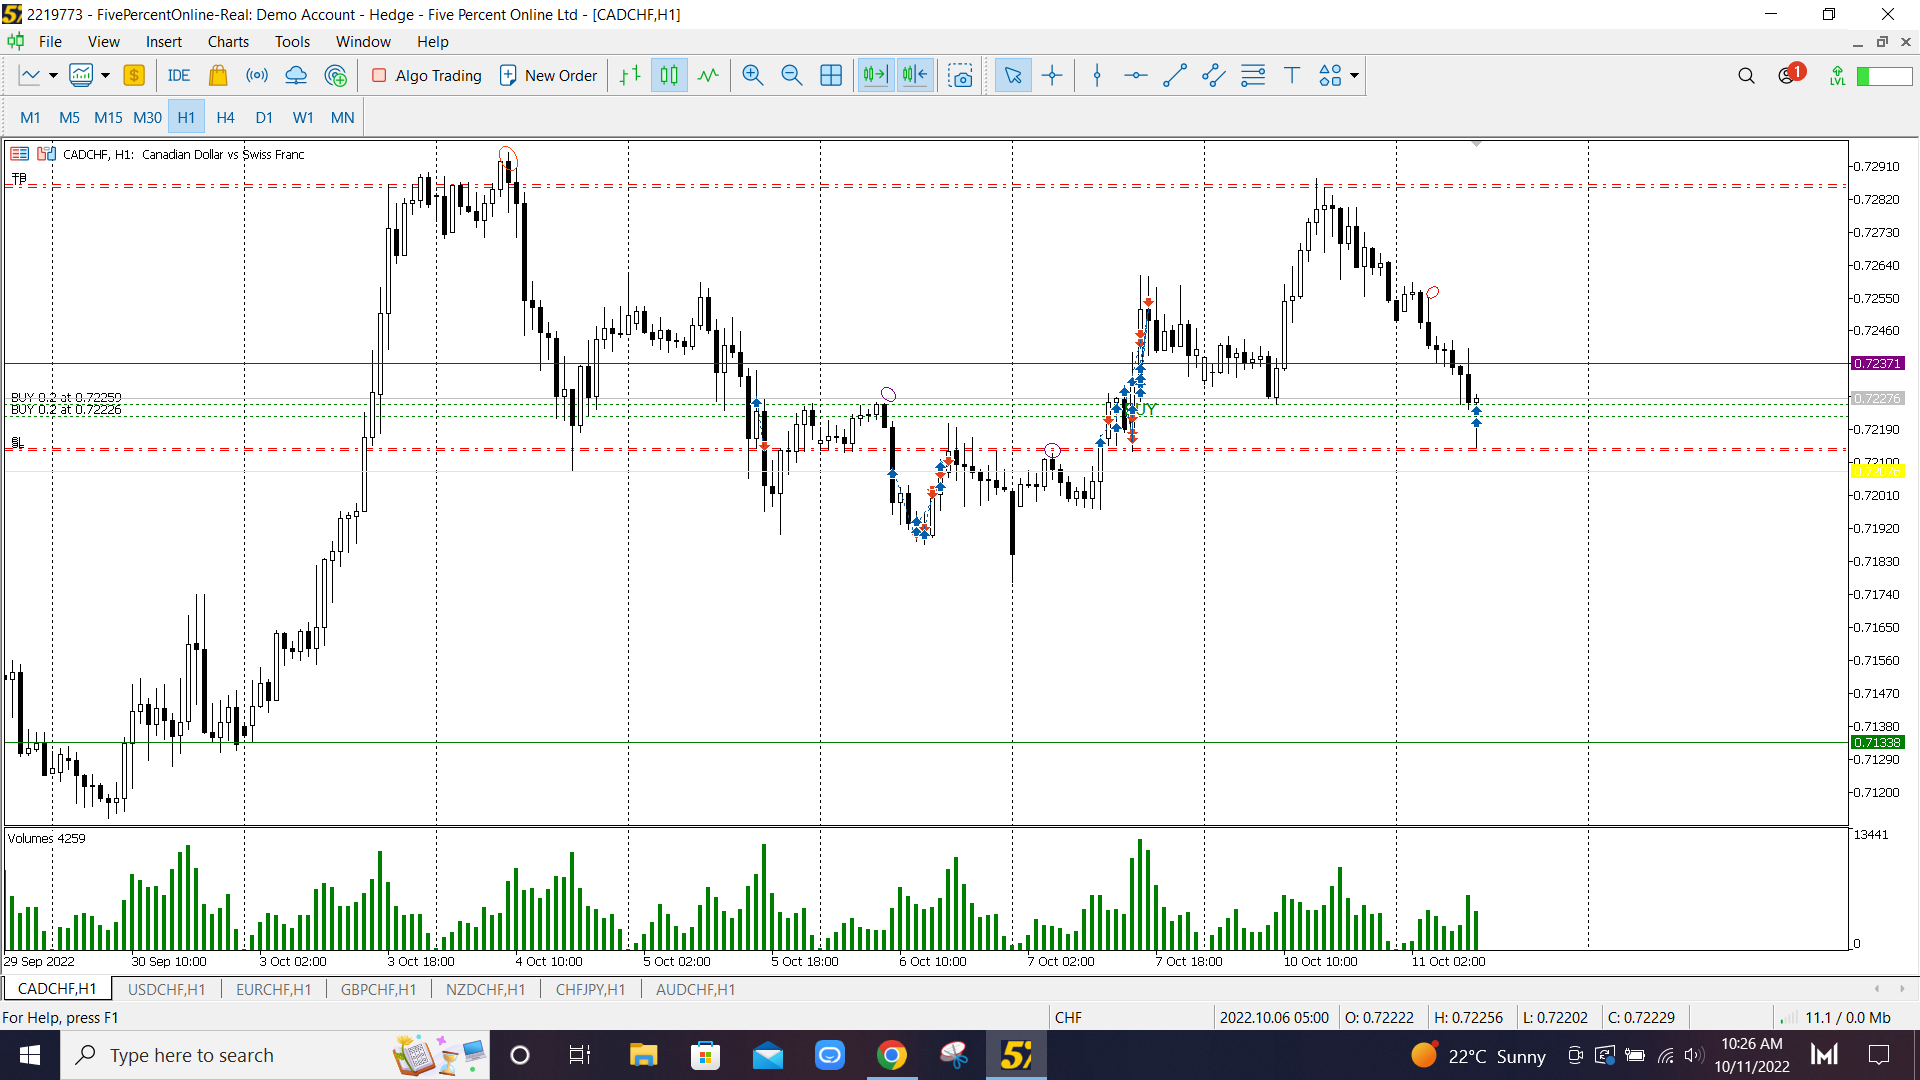 CAD/CHF H1 Continuation